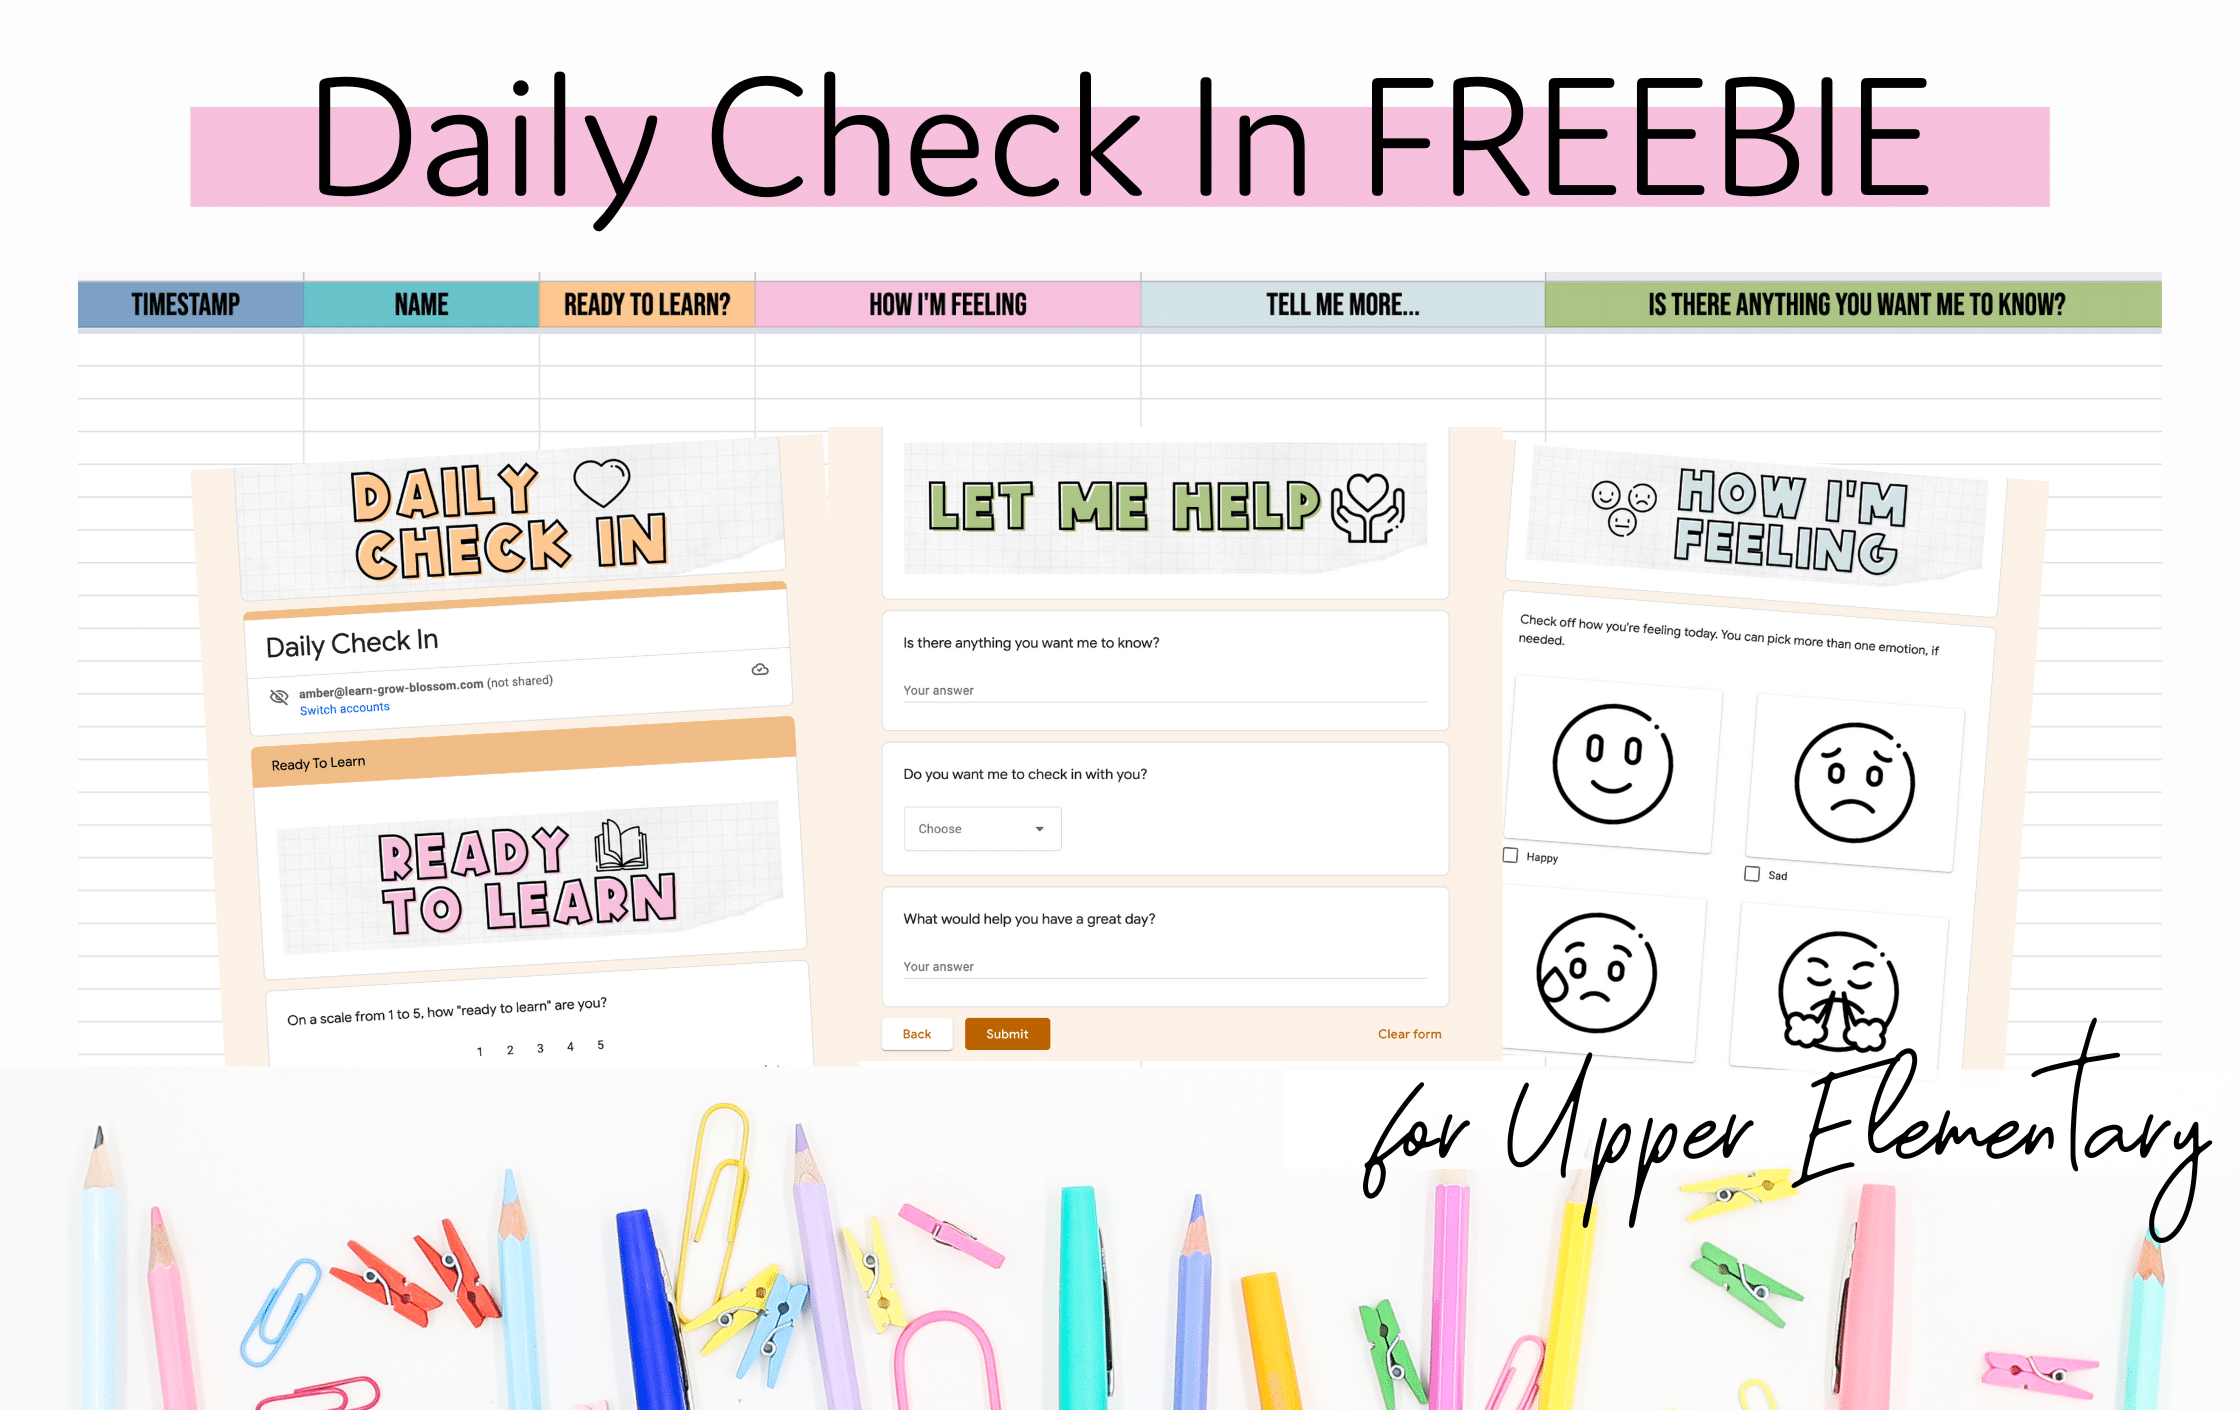 Daily Check In FREEBIE for Upper Elementary Students showing screenshots from the Google Form where students fill in if they are ready to learn, how they are feeling, and if they need support that day. Also features a photo of school supplies